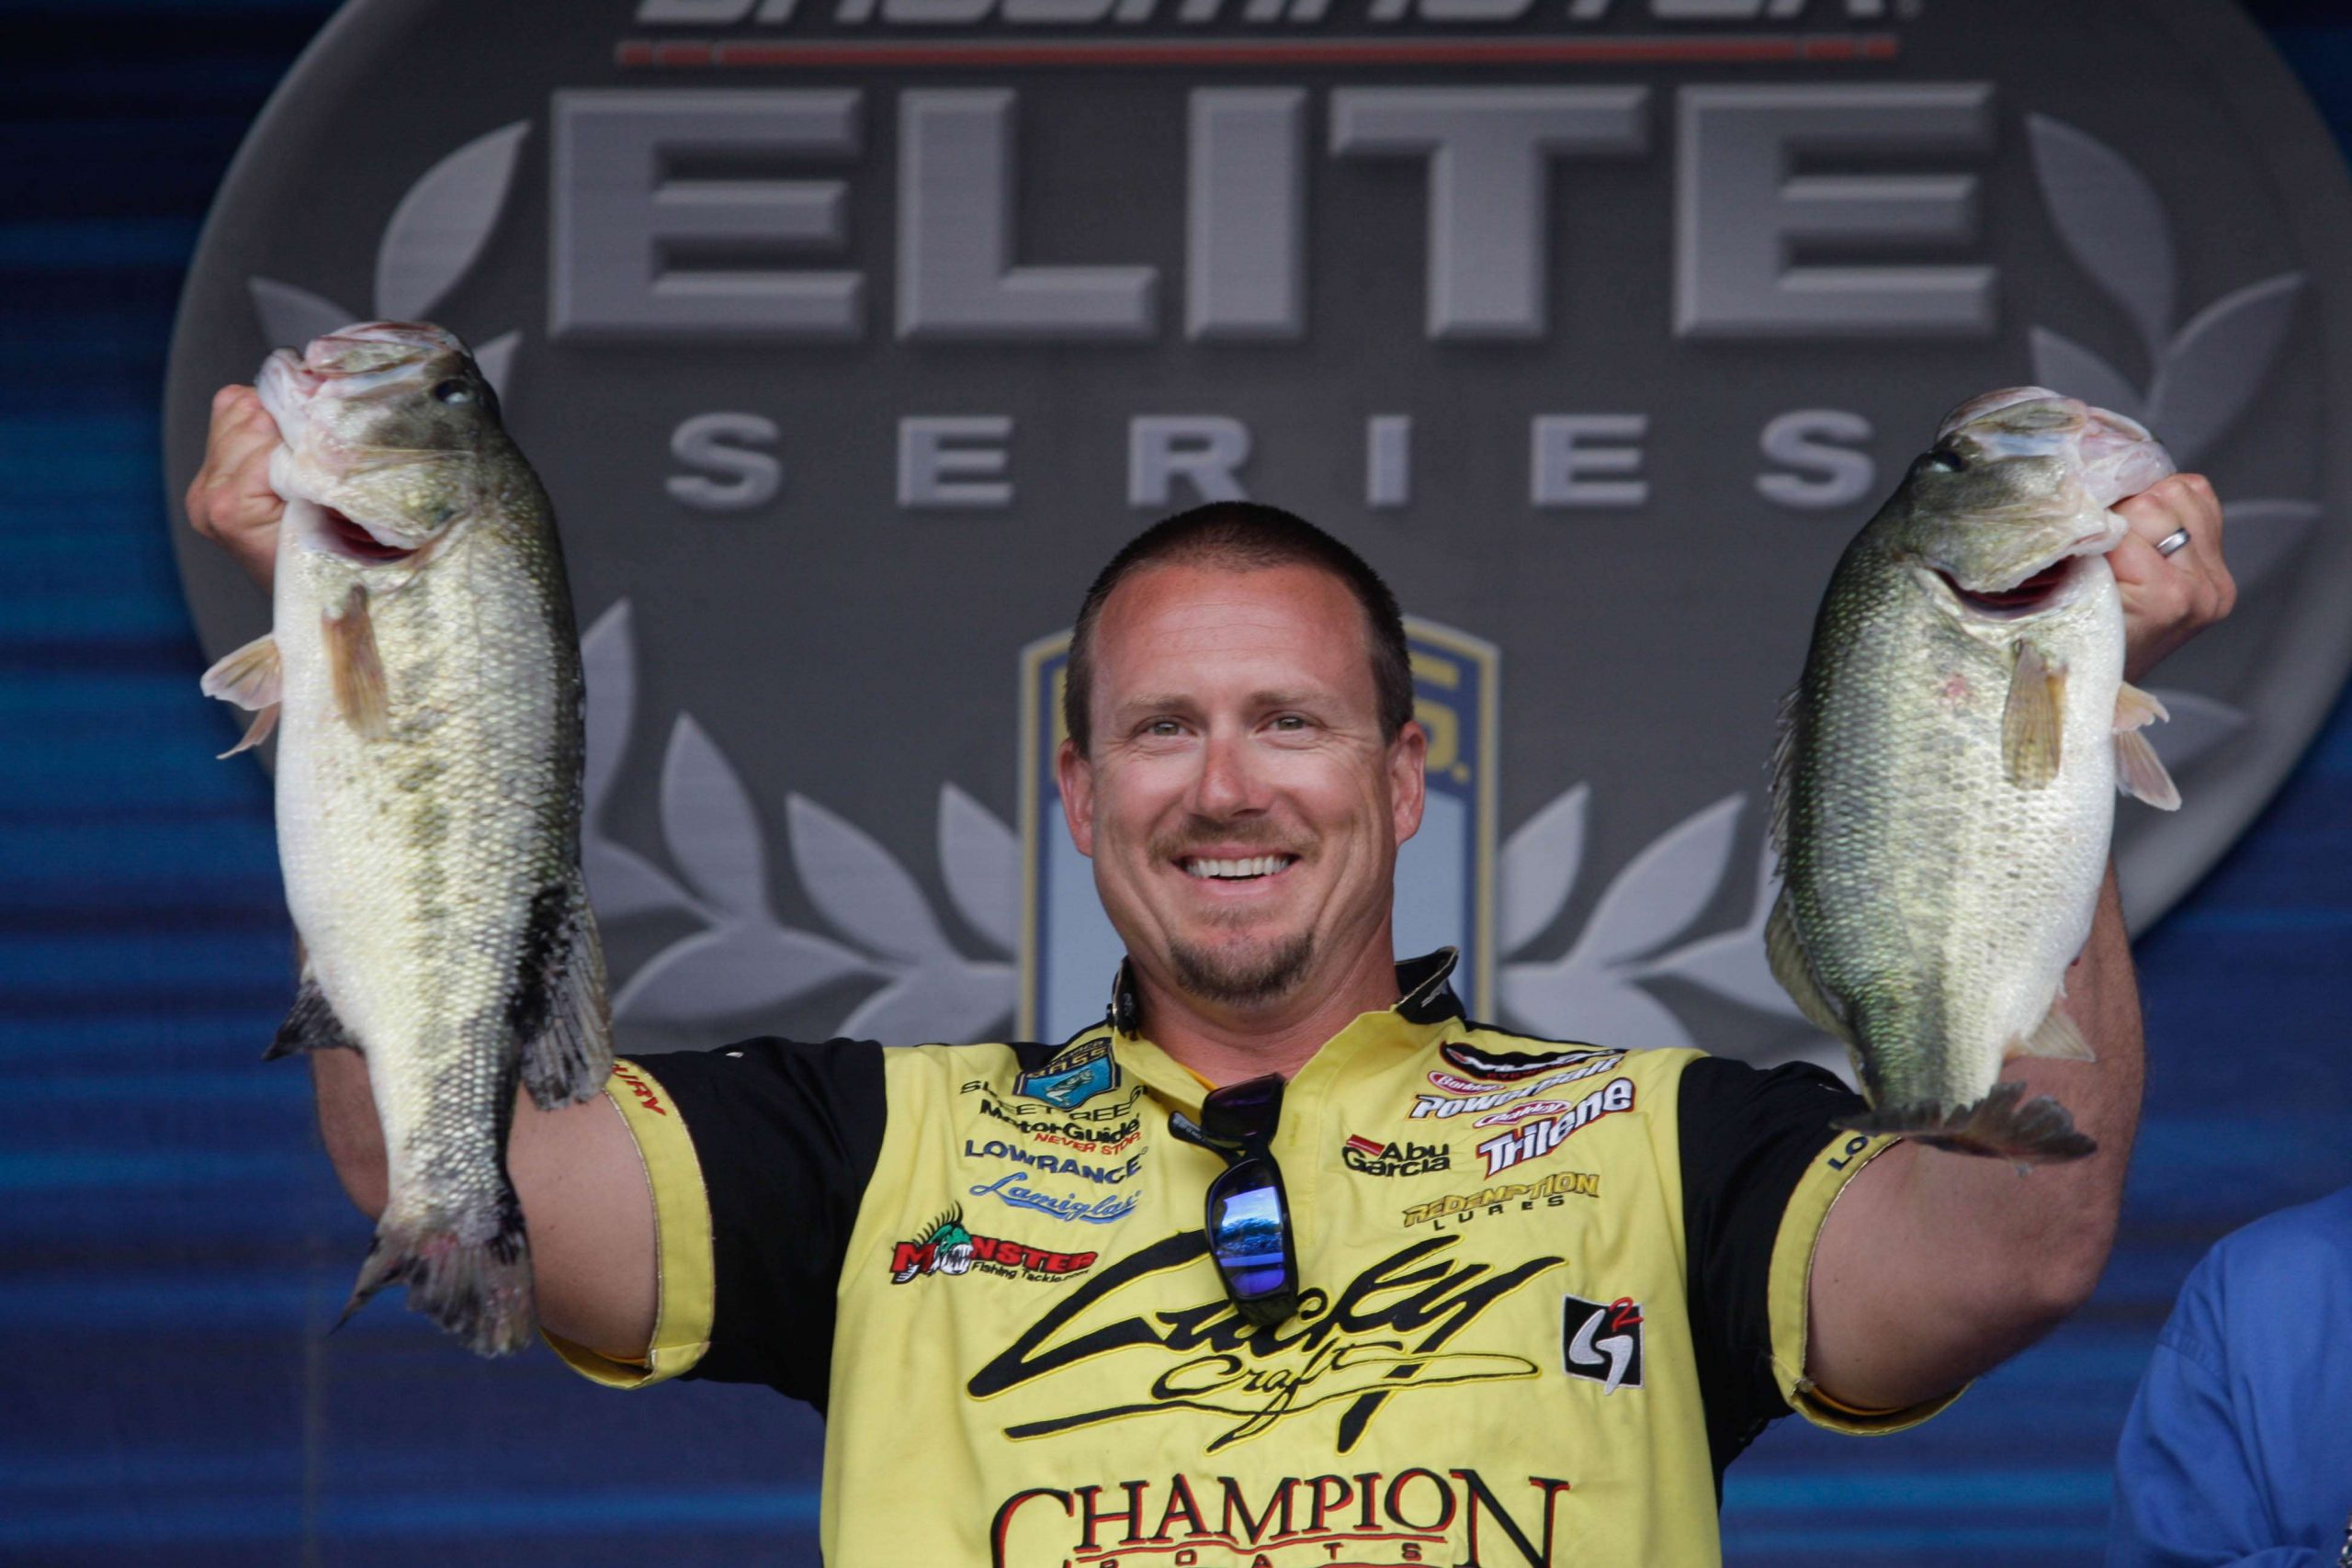 Reese sacked more than 27 pounds on Day 4, giving him 104 pounds, 4 ounces, good enough for a runner-up spot. But he exacted revenge the next May when the Elite Series went back to Guntersville. Then, he caught 100-13 and took home the win.